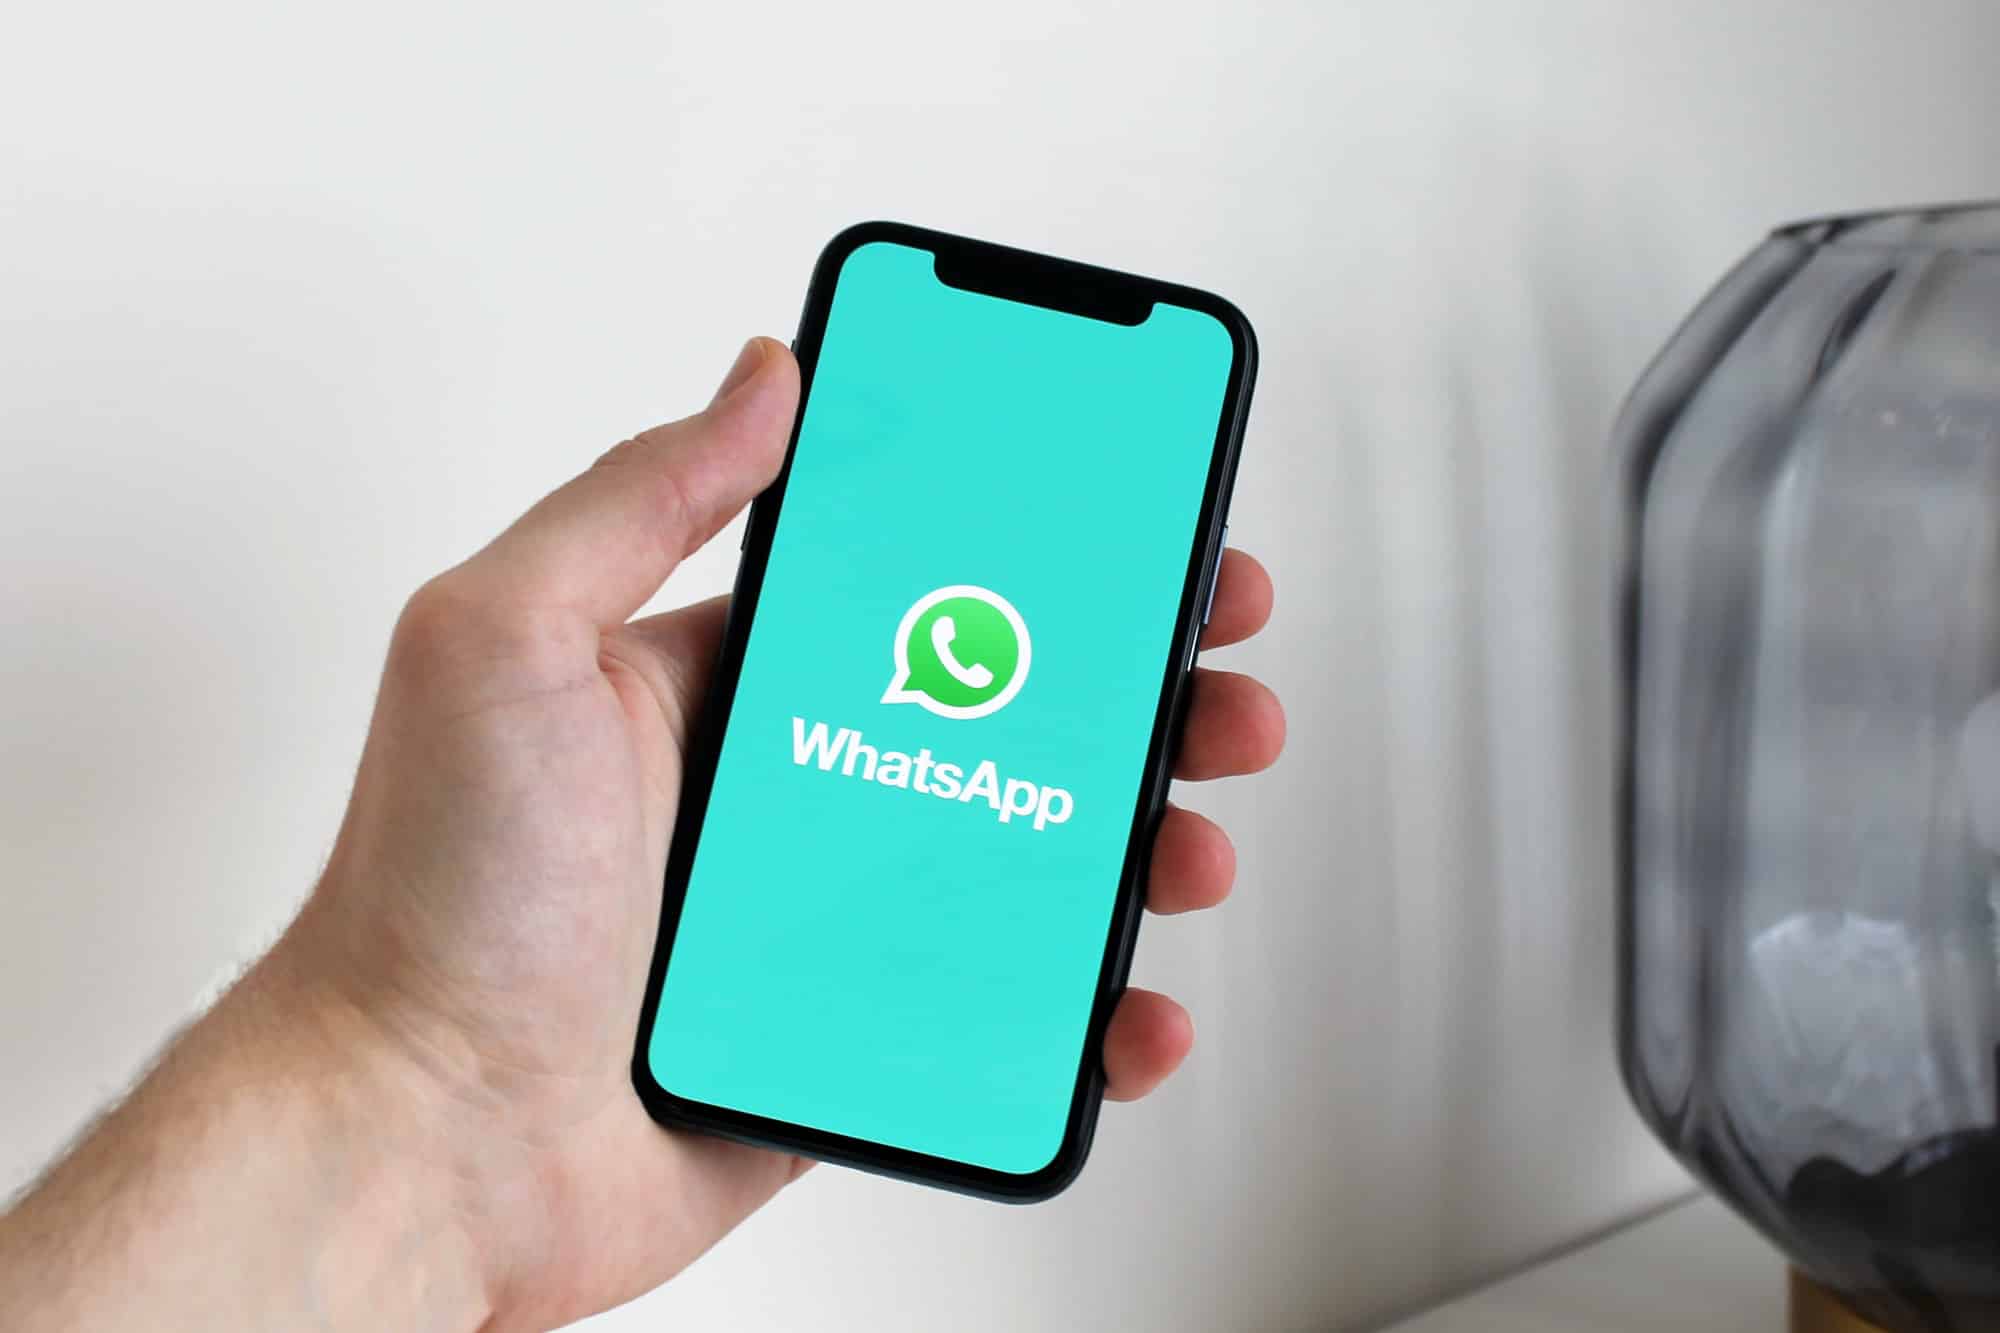 A person holds an iPhone with a green screen showing the WhatsApp logo